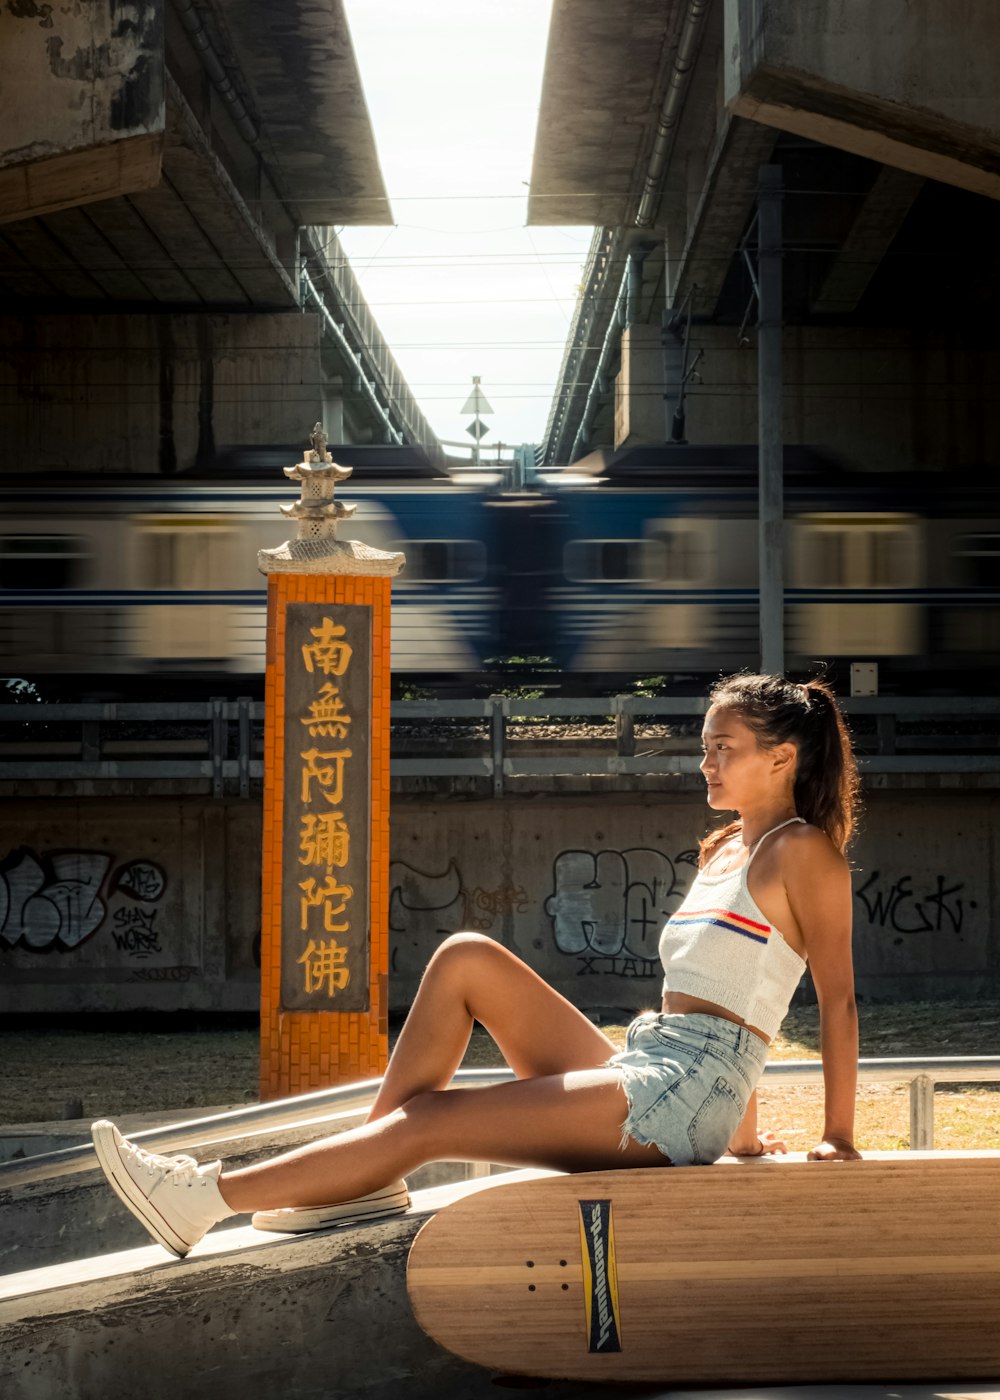 a woman sitting on a skateboard in a train station